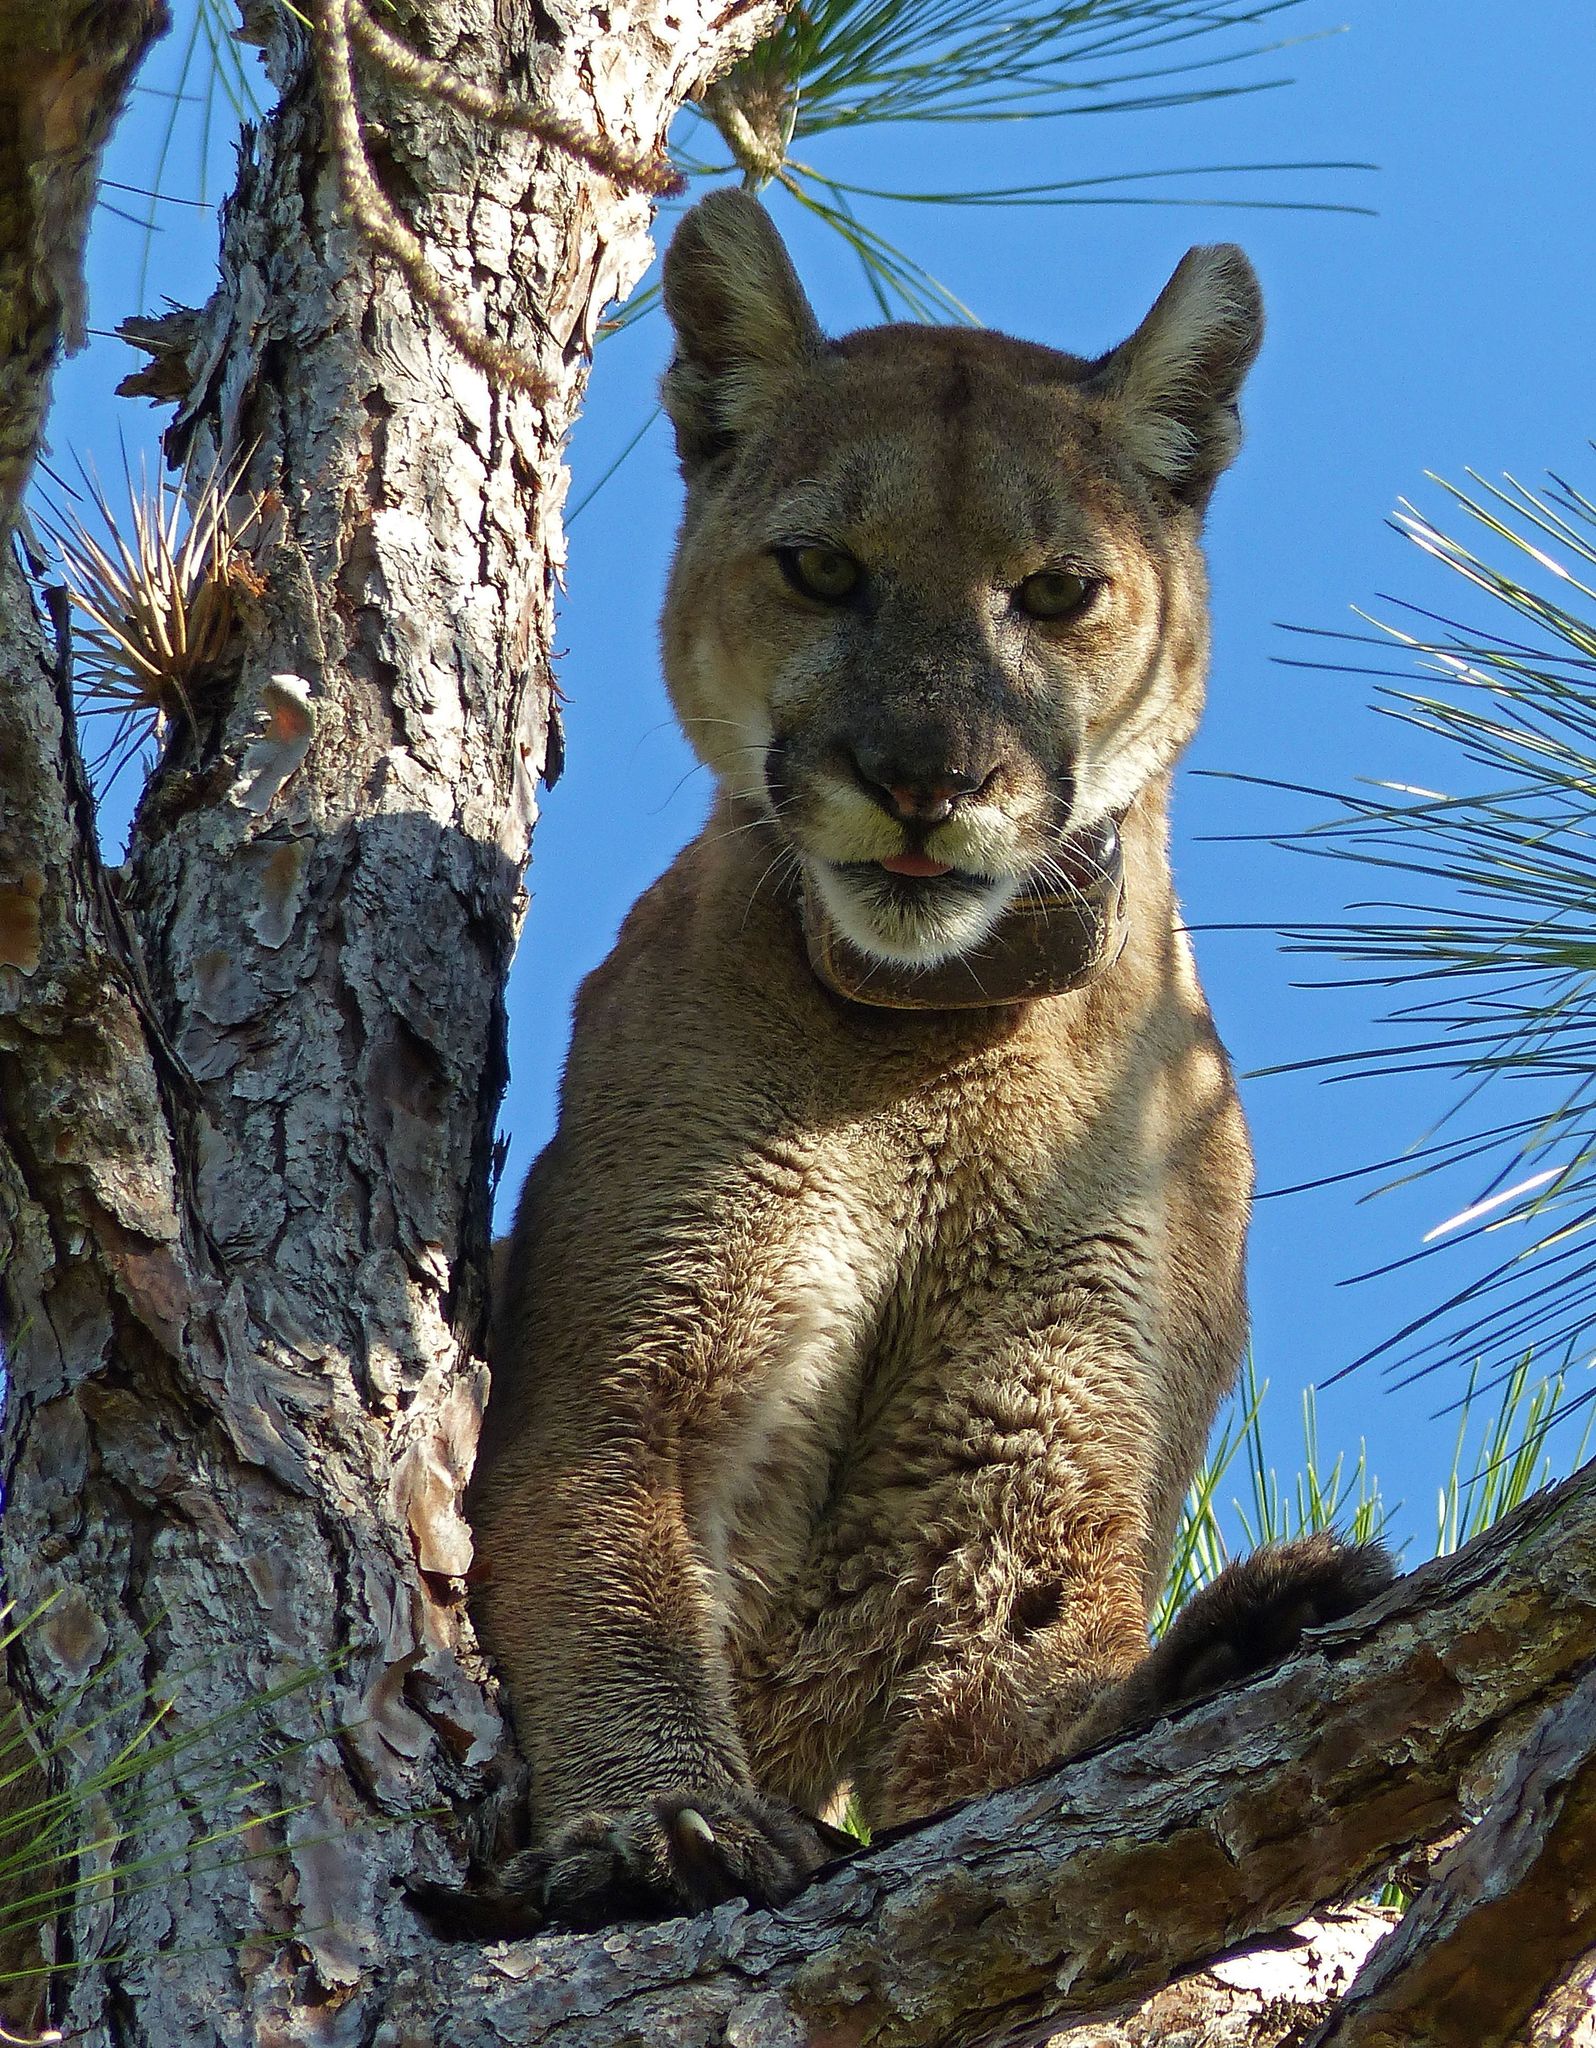 The Florida Panther is one of the most iconic animals of Big Cypress